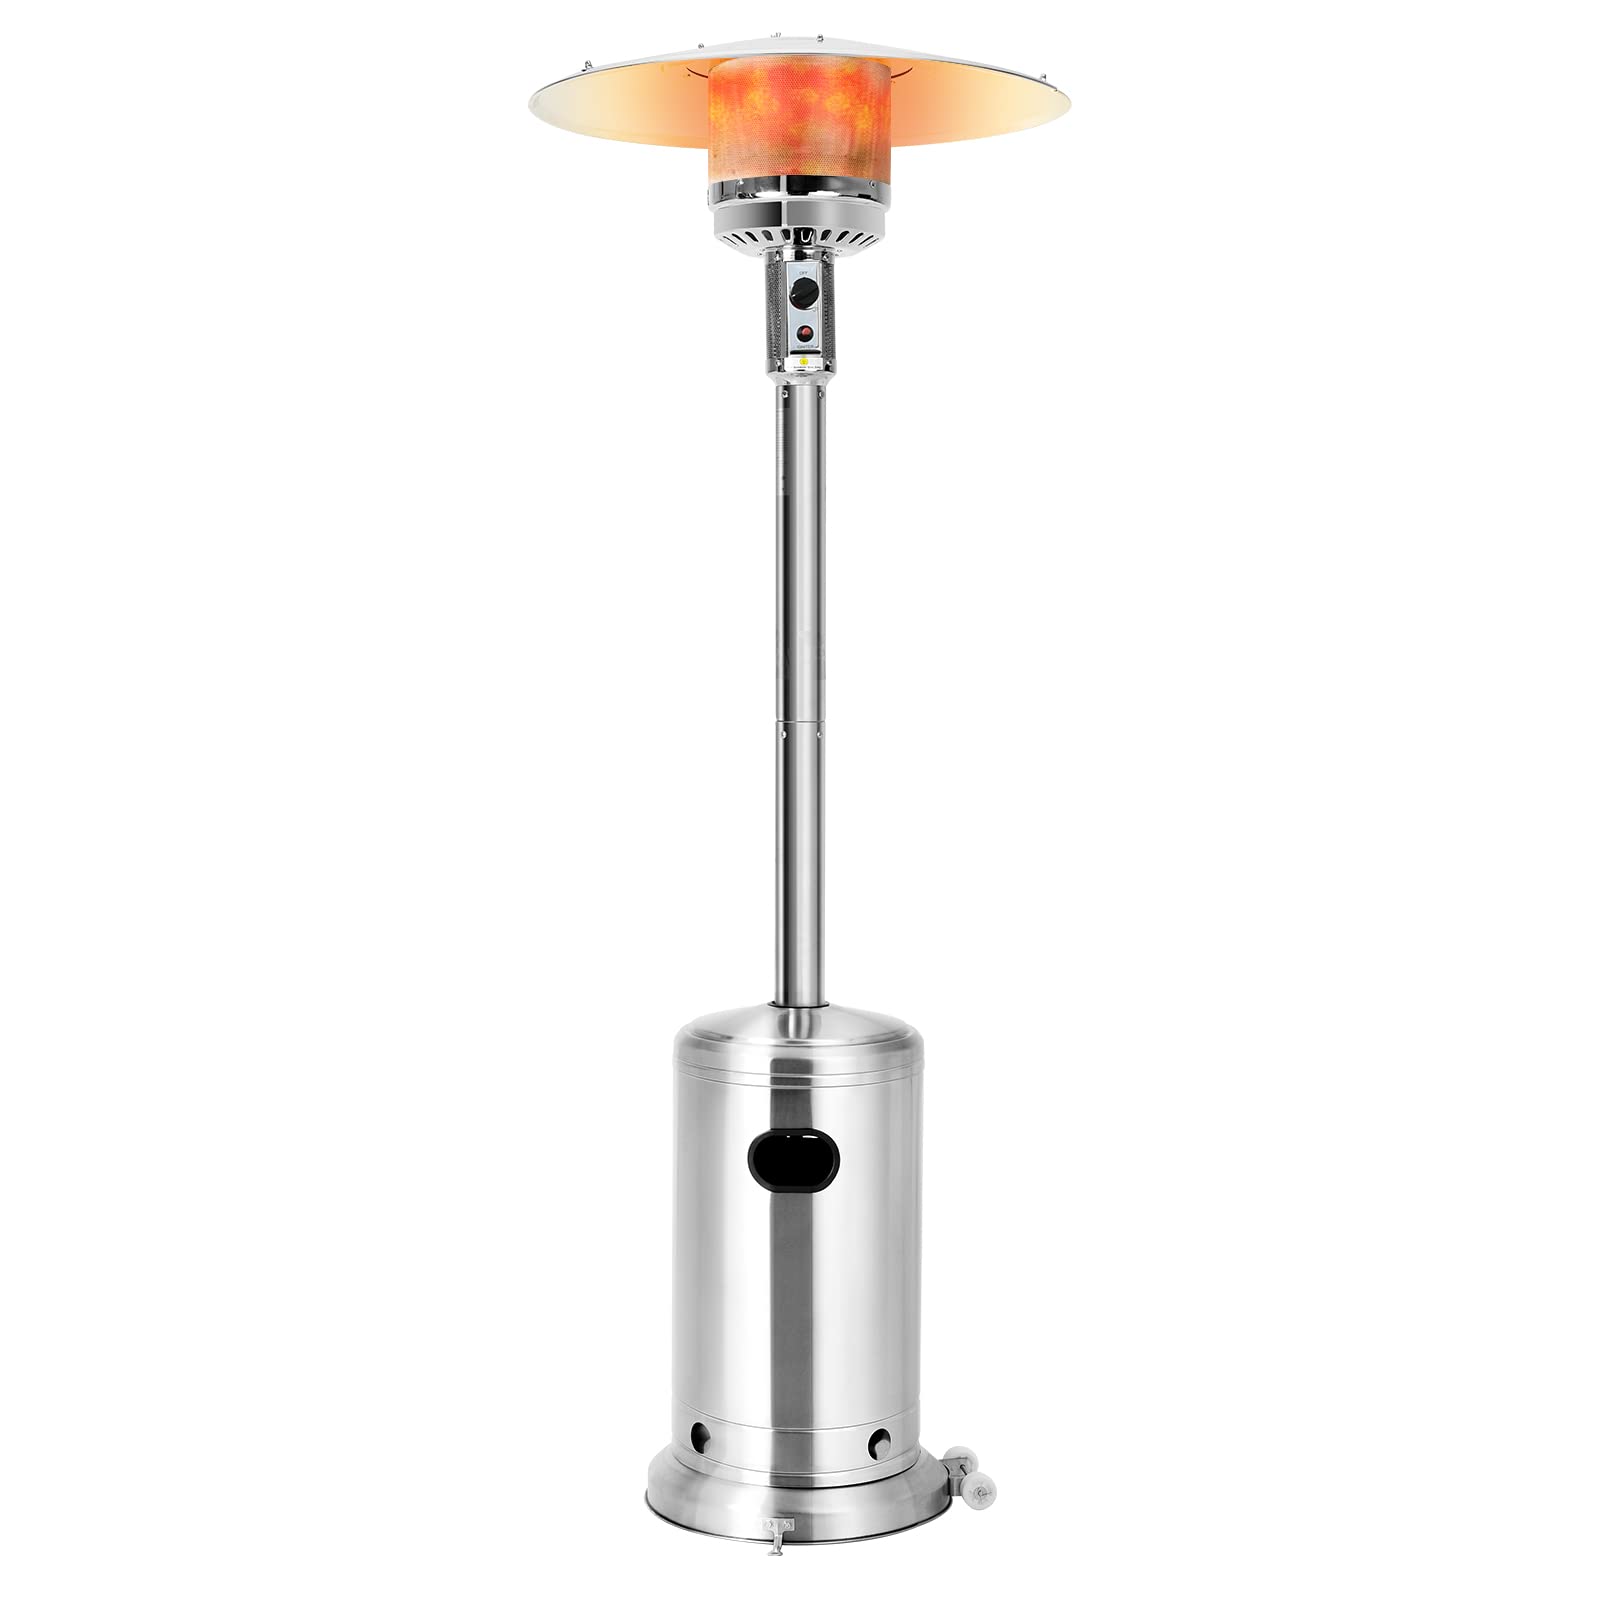 Giantex Patio Heaters for Outdoor Use, 48000 BTU Propane Outdoor Heaters with Wheels